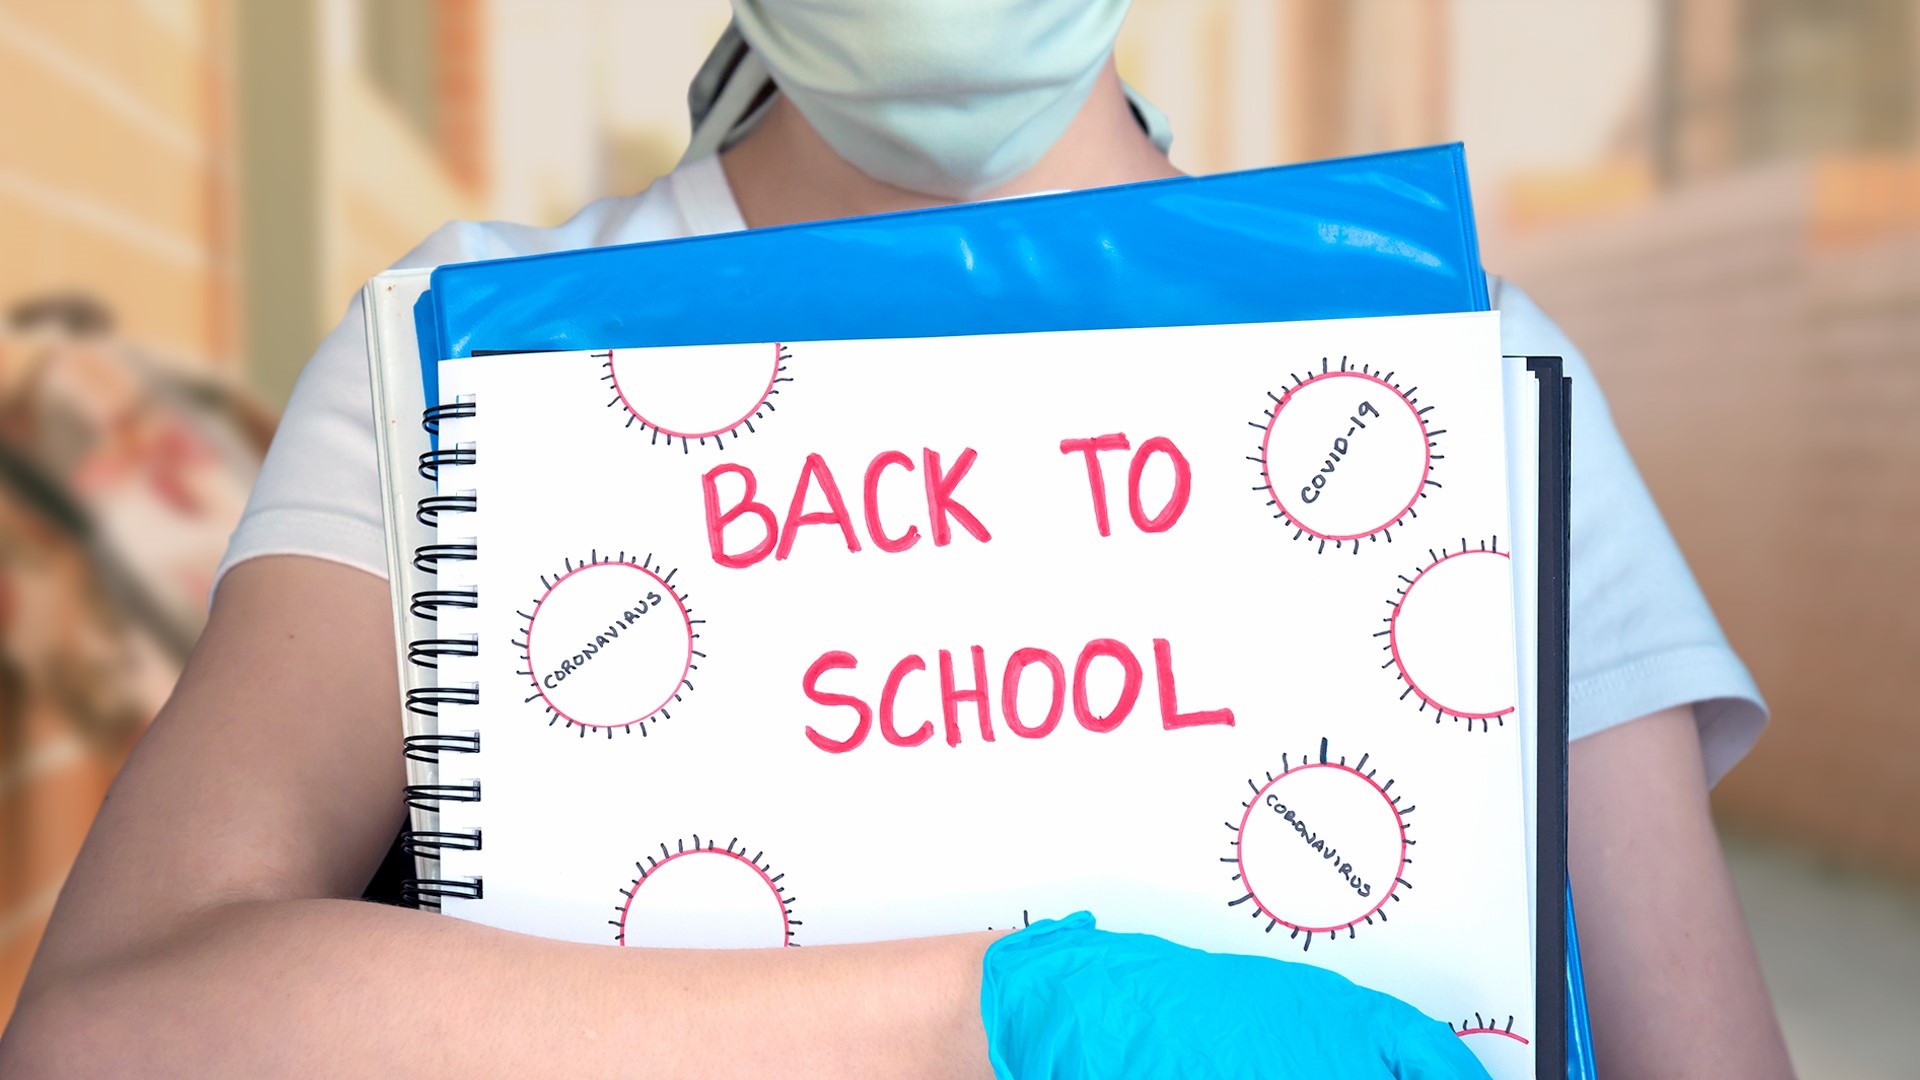 Some parents think going back to school would be unsafe, while others think staying home is doing more harm than good.